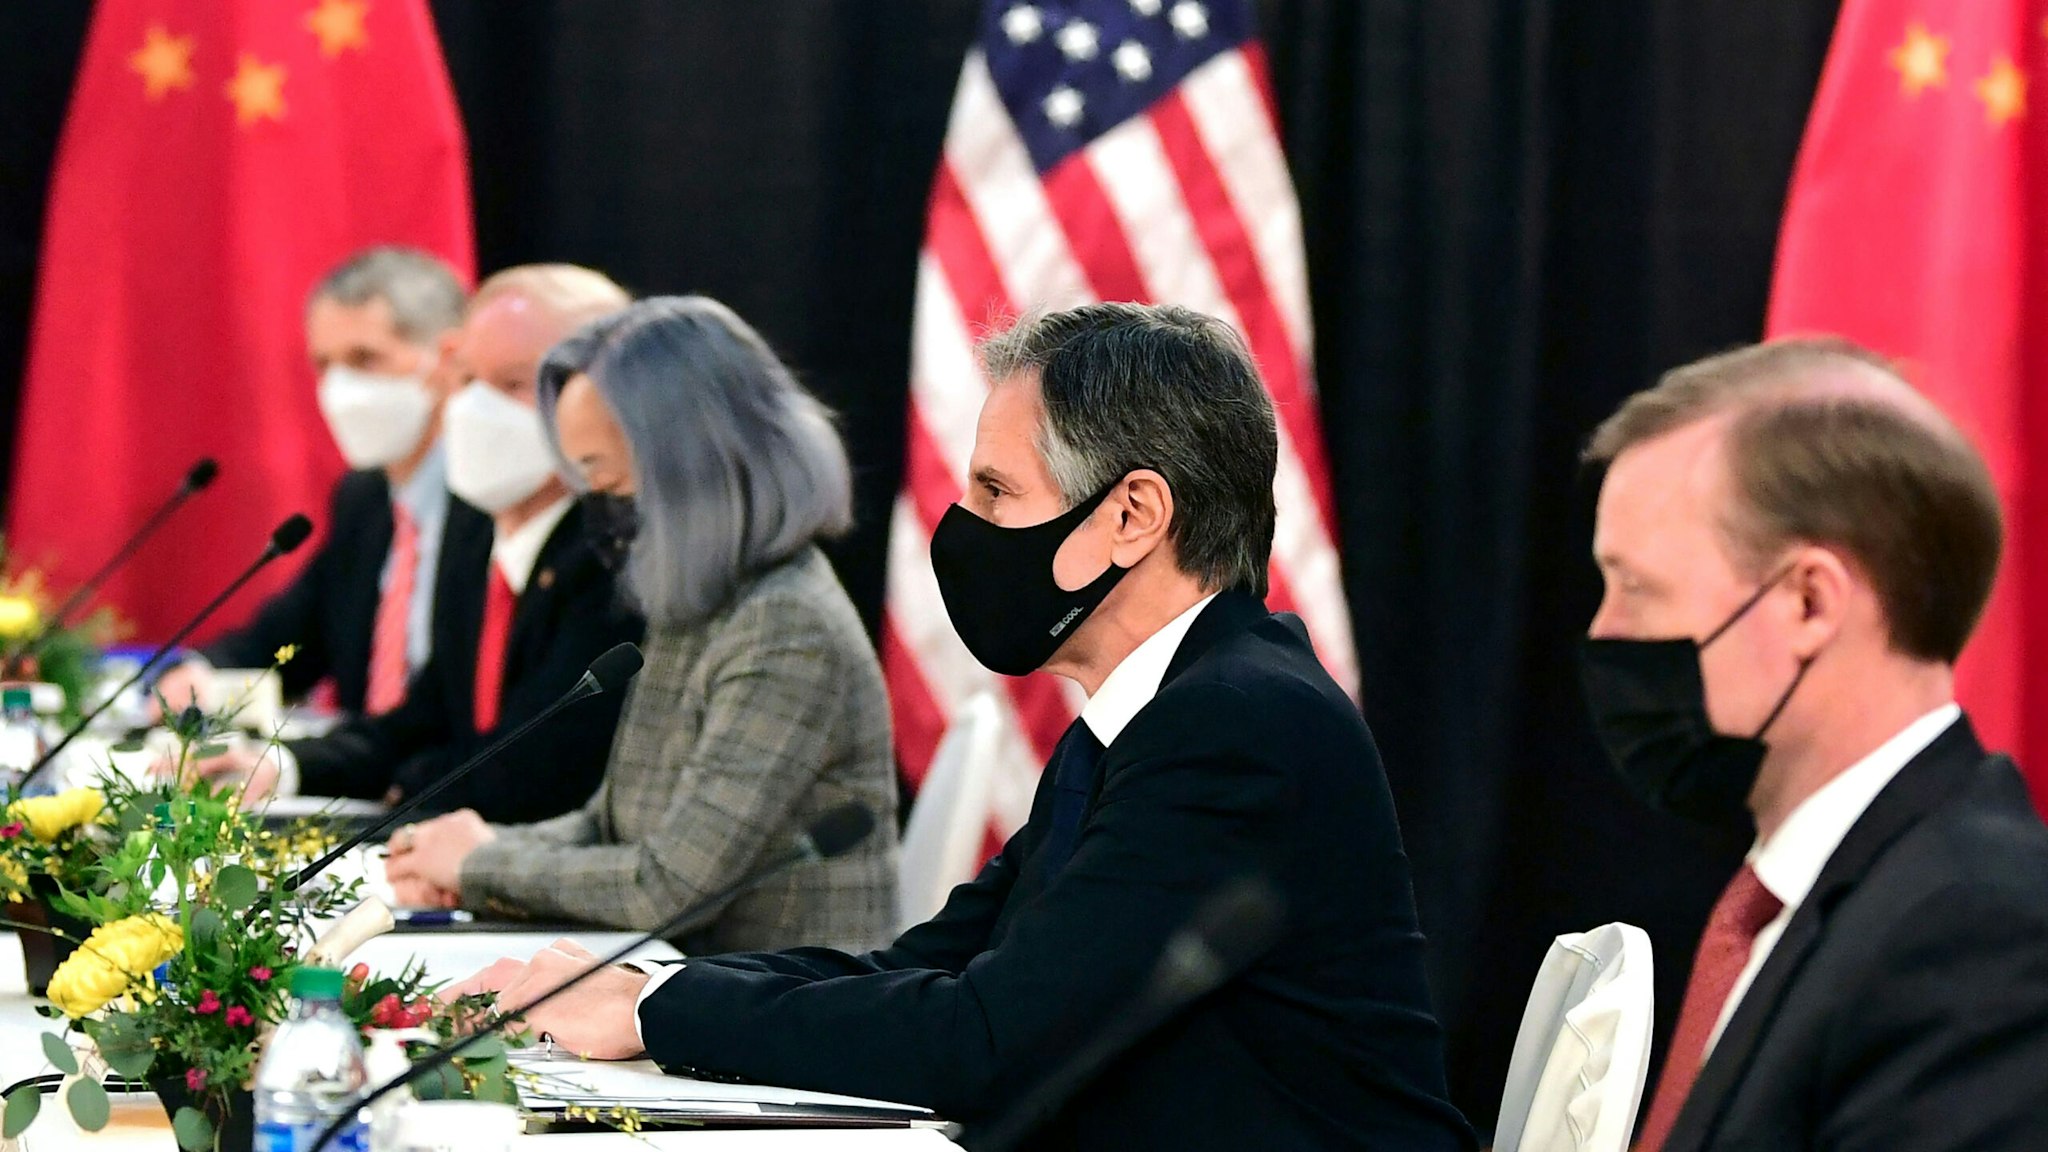 The US delegation led by Secretary of State Antony Blinken (C), flanked by US National Security Advisor Jake Sullivan (R), face their Chinese counterparts at the opening session of US-China talks at the Captain Cook Hotel in Anchorage, Alaska on March 18, 2021. - China's actions "threaten the rules-based order that maintains global stability," US Secretary of State Antony Blinken said Thursday at the opening of a two-day meeting with Chinese counterparts in Alaska.